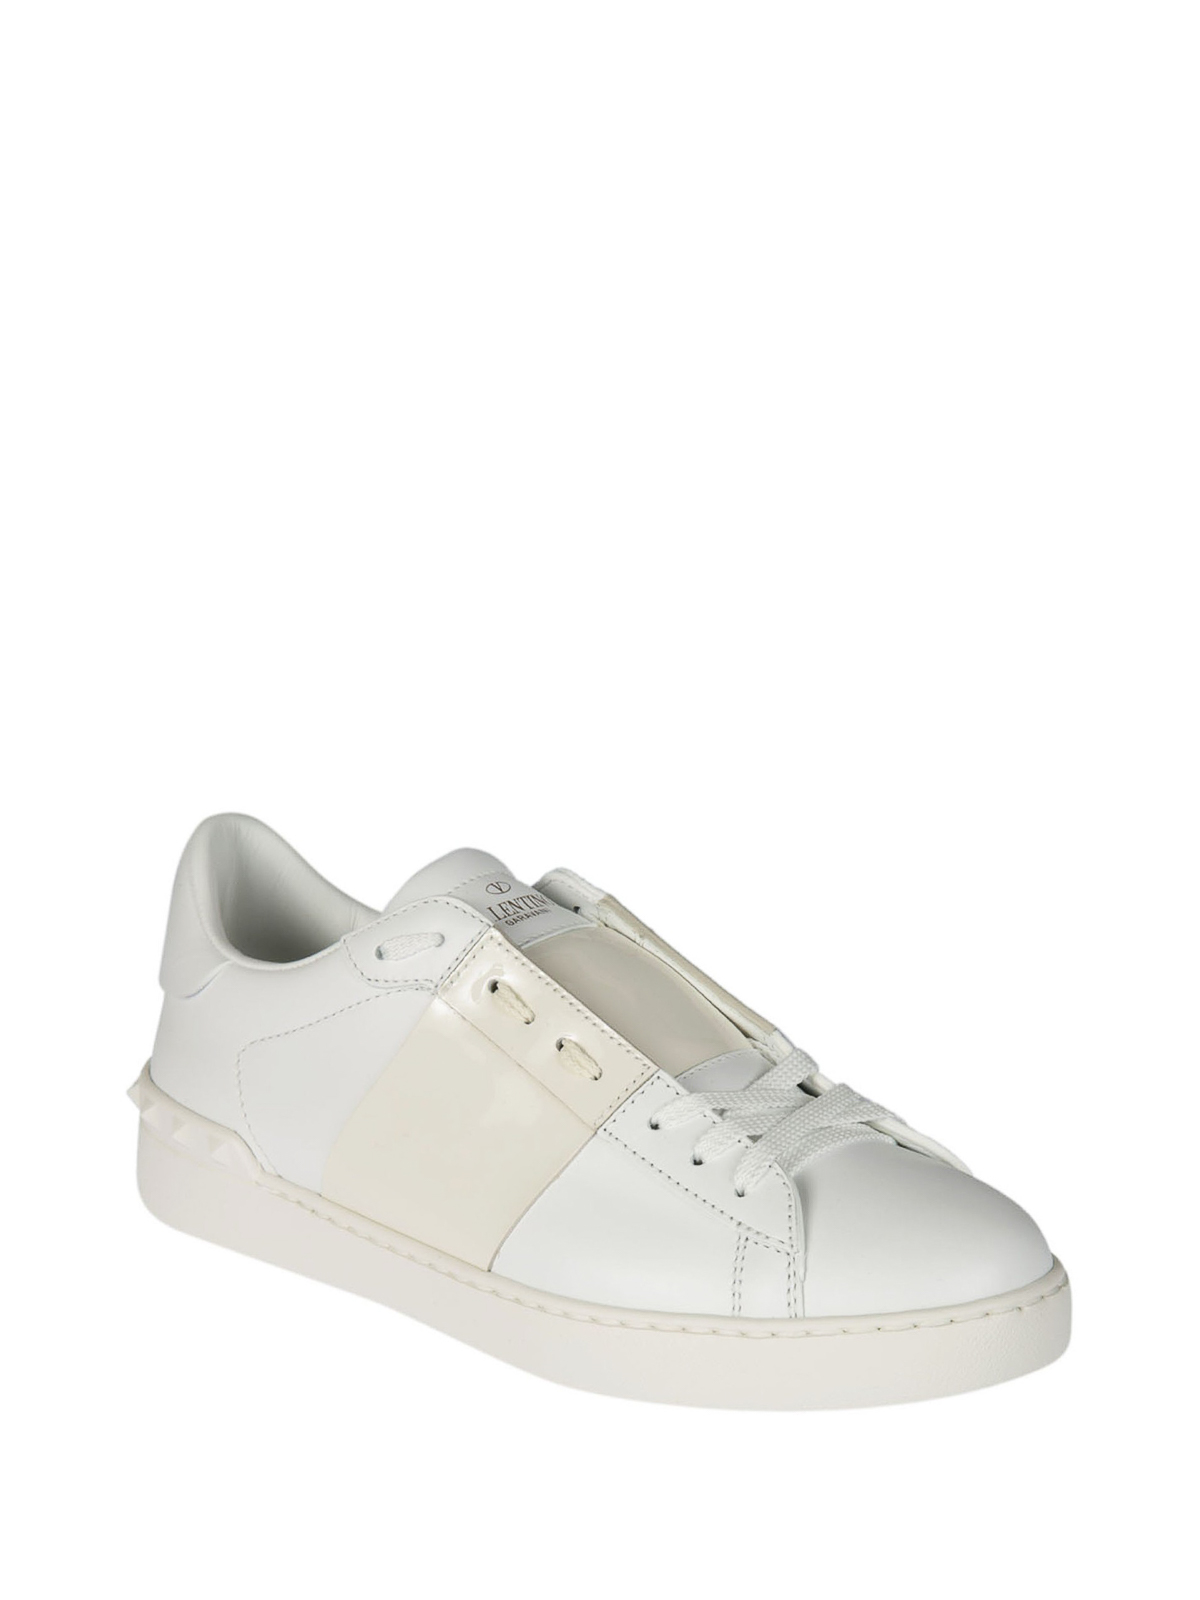 Patent leather band detail sneakers